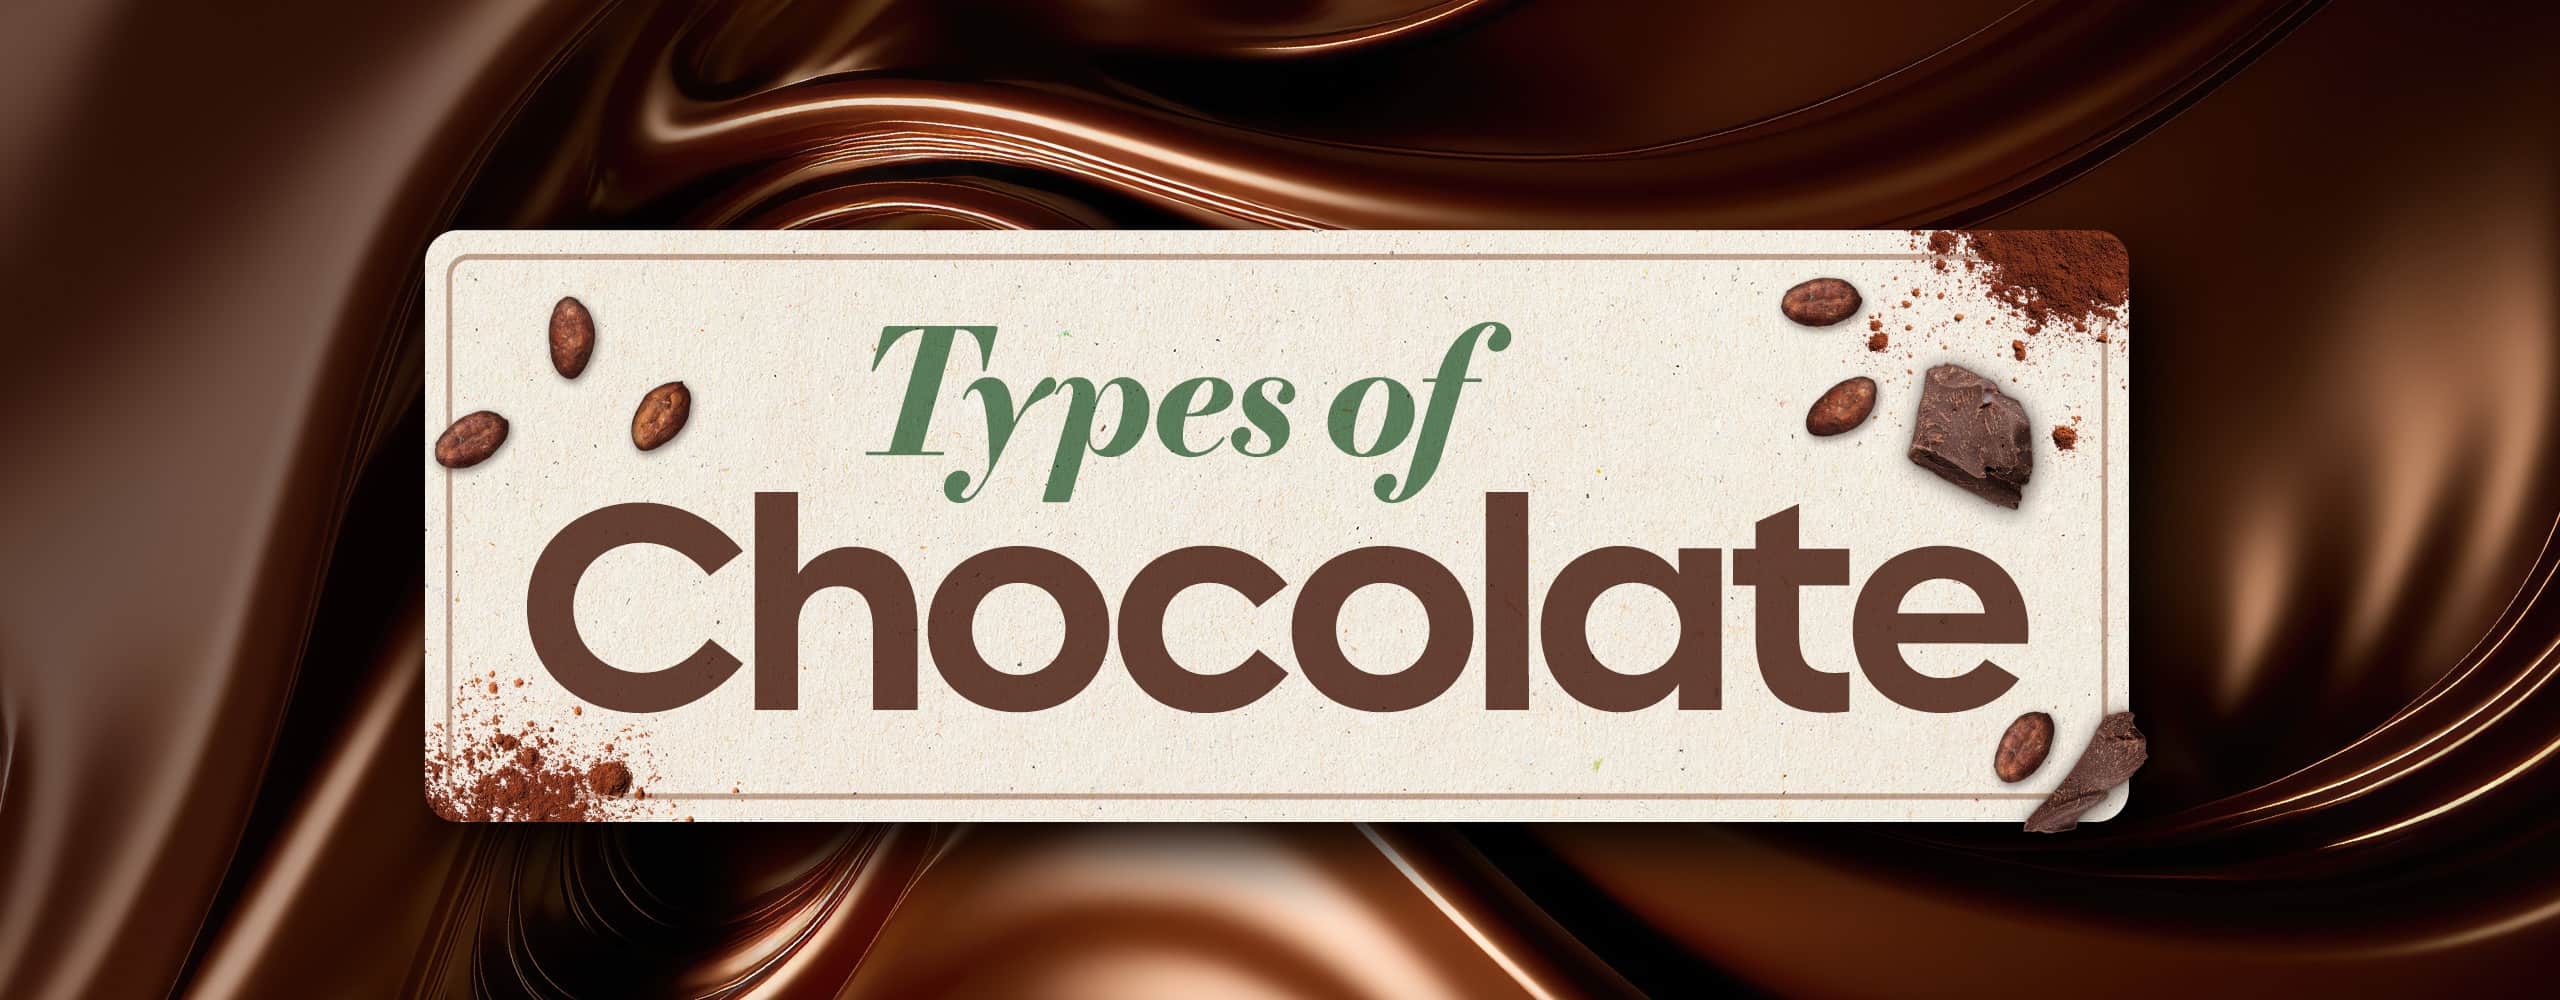 Common Chocolate Types and Varieties